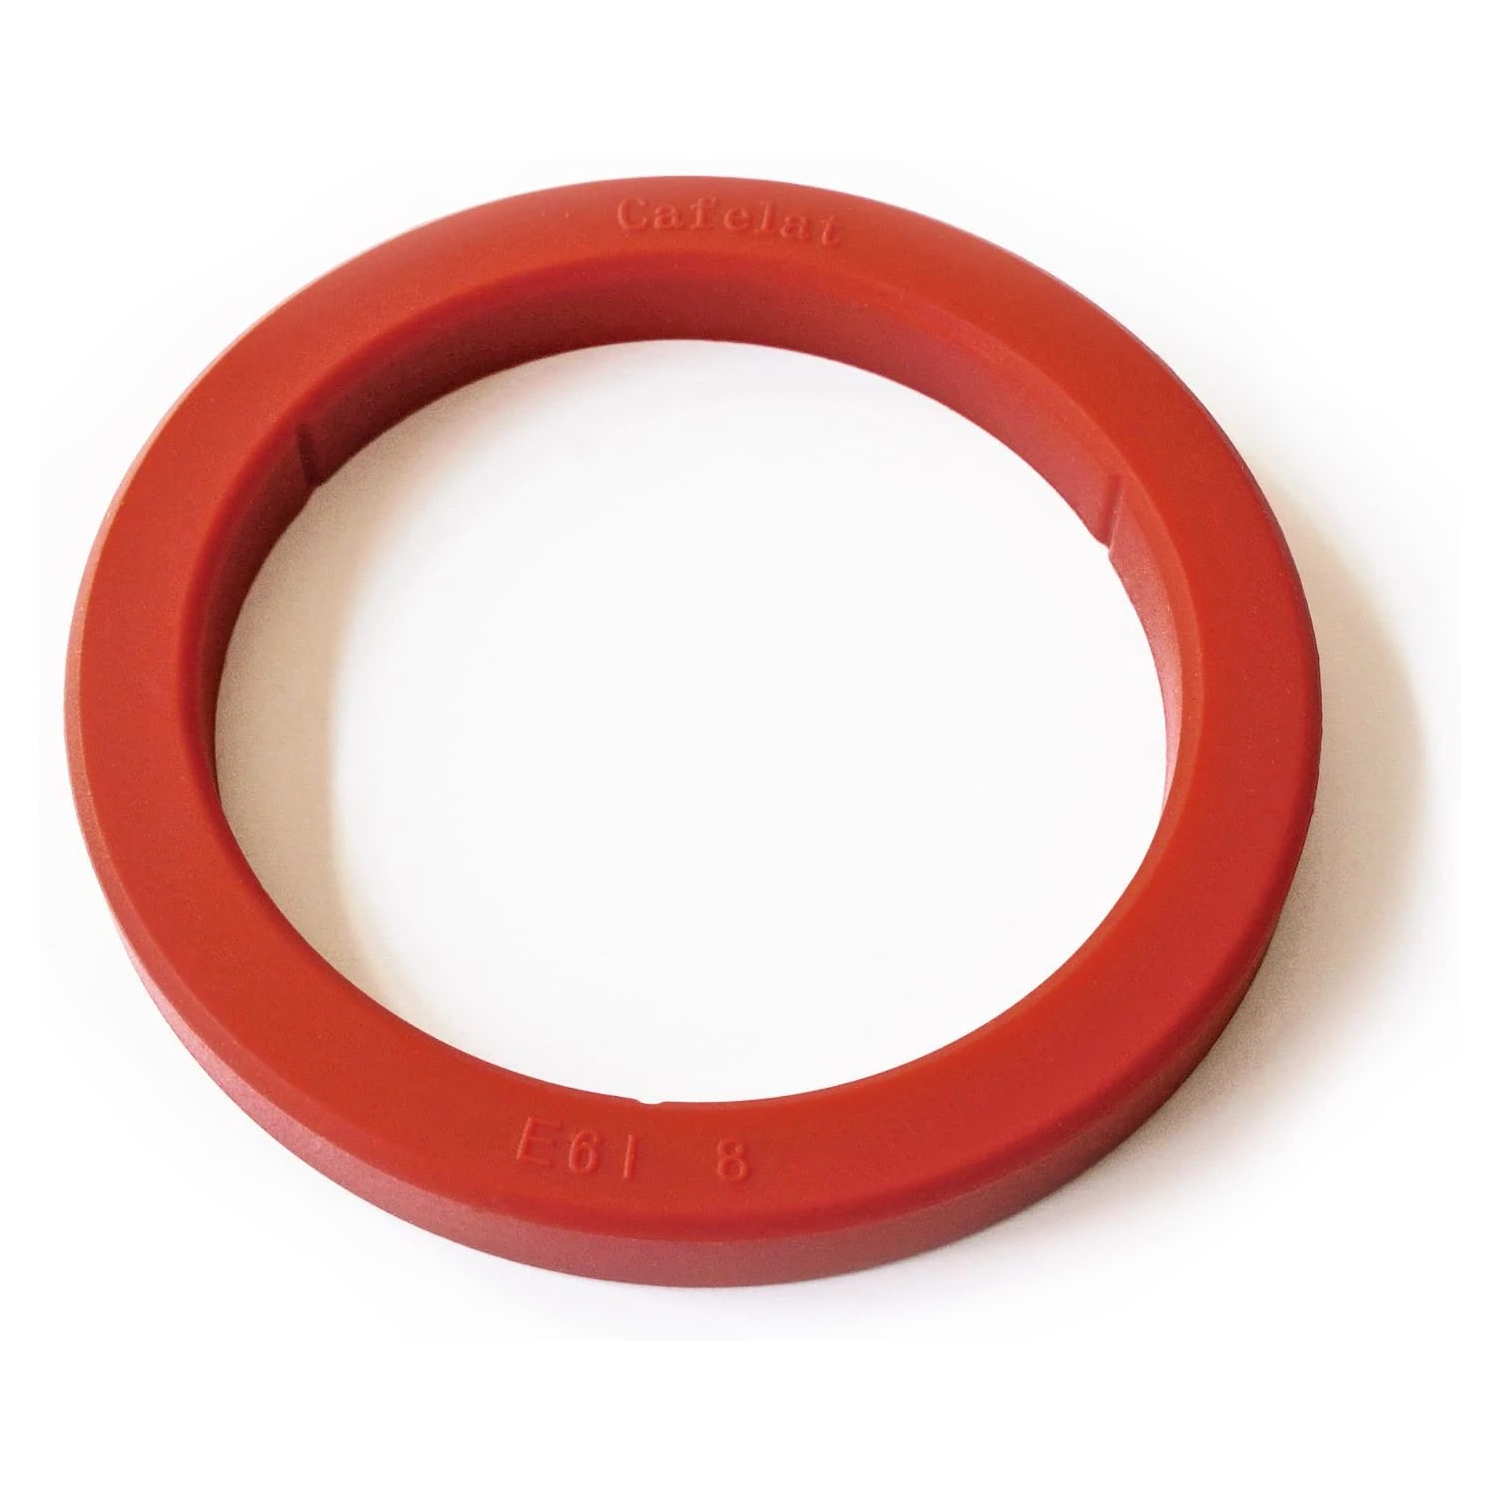 Cafelat E61 8mm red silicone group gasket